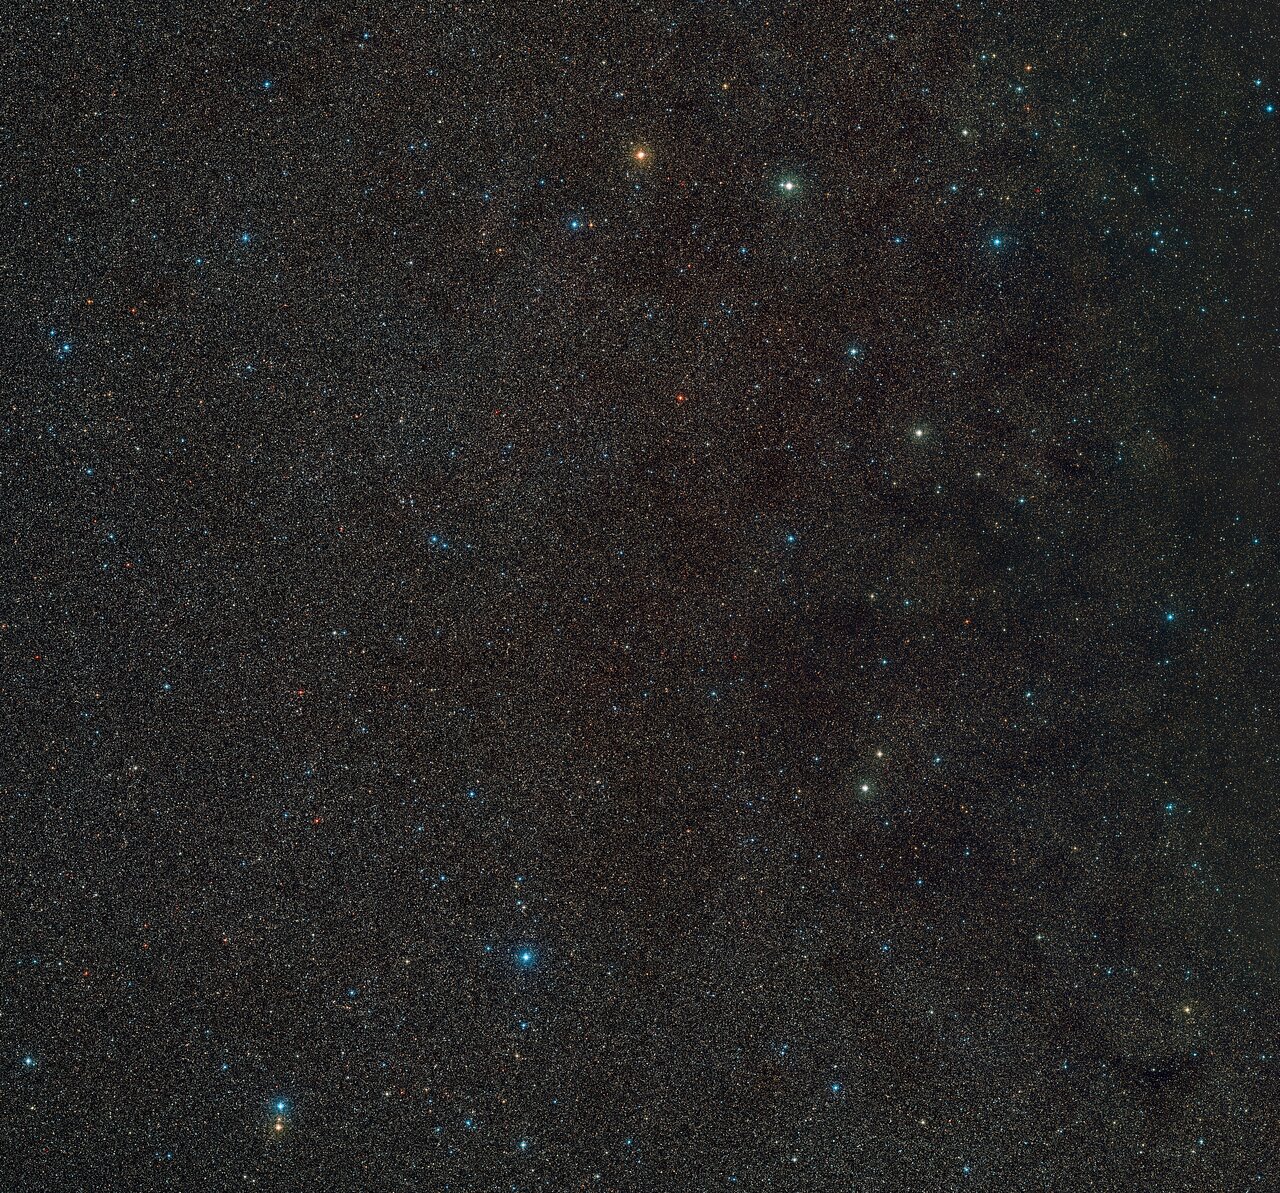 image of a patch of space with hundreds of distant stars